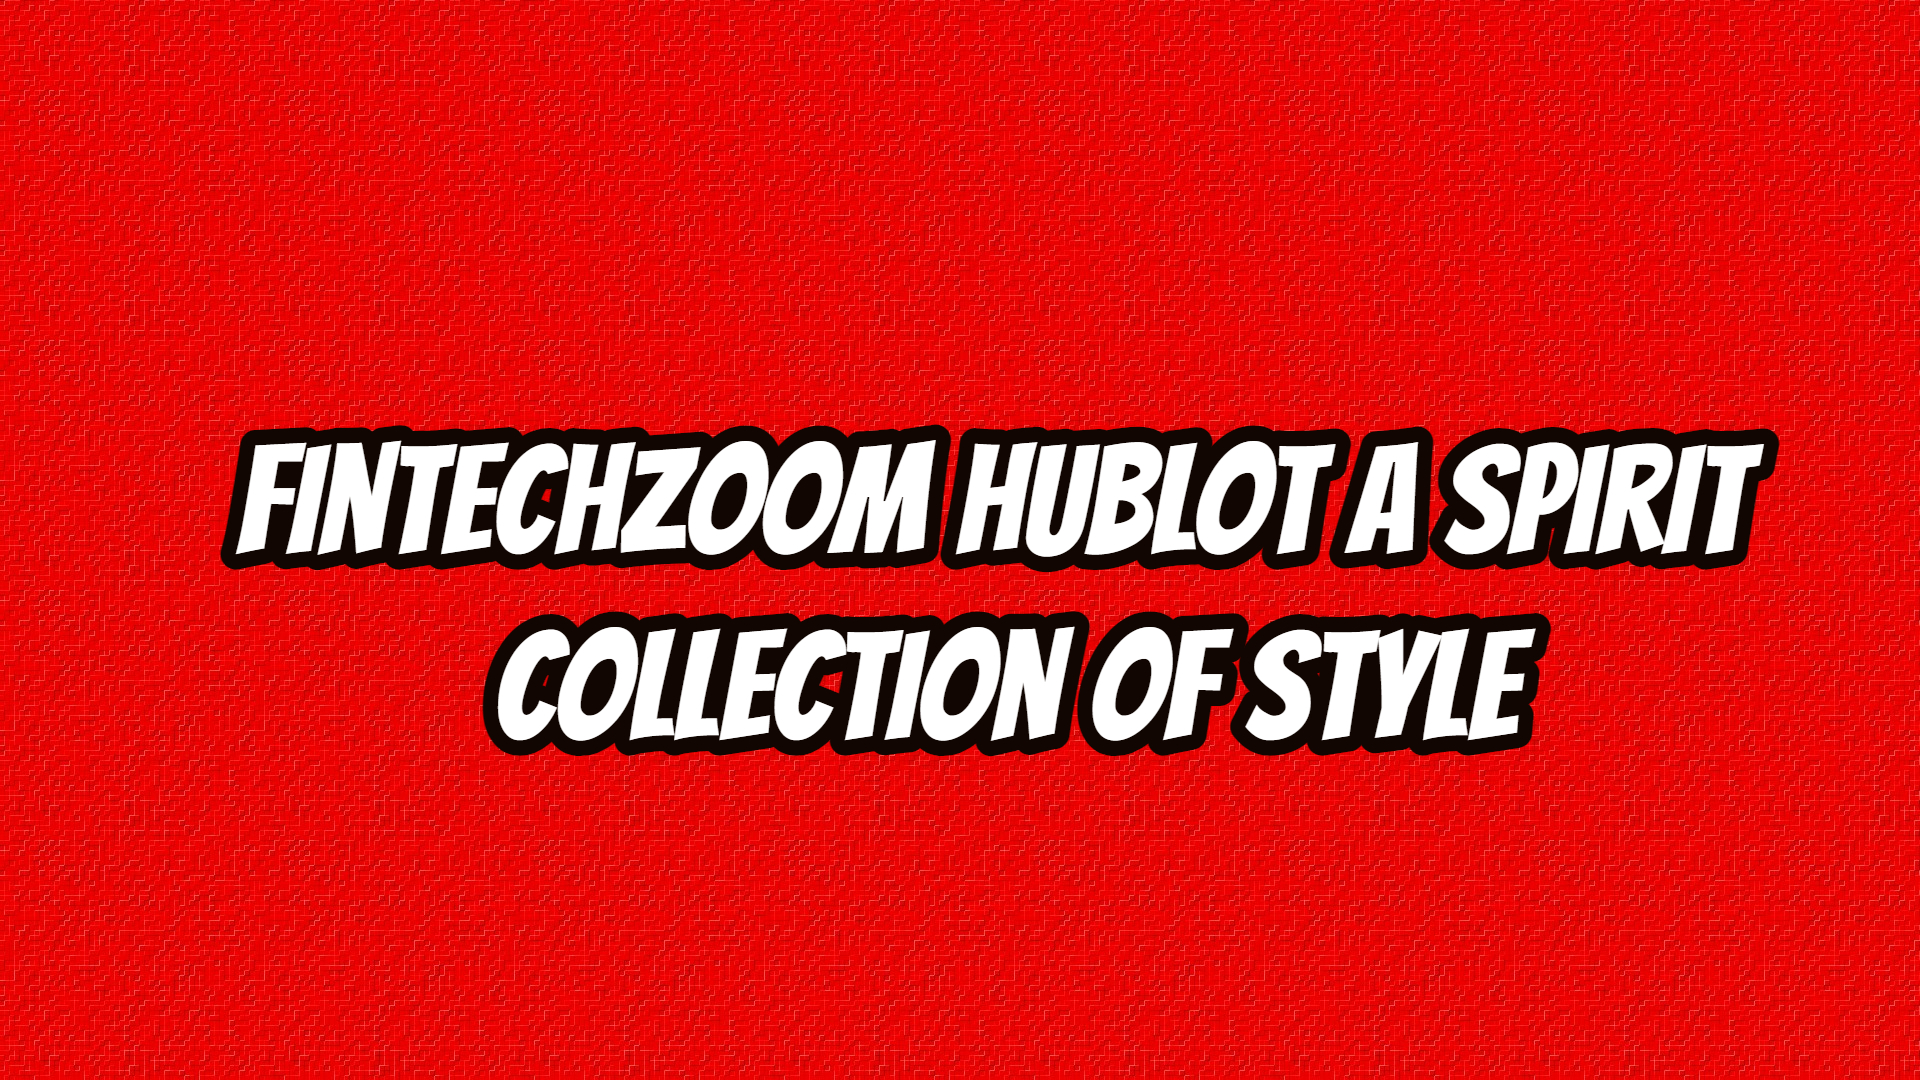 Fintechzoom hublot a Spirit Collection of style